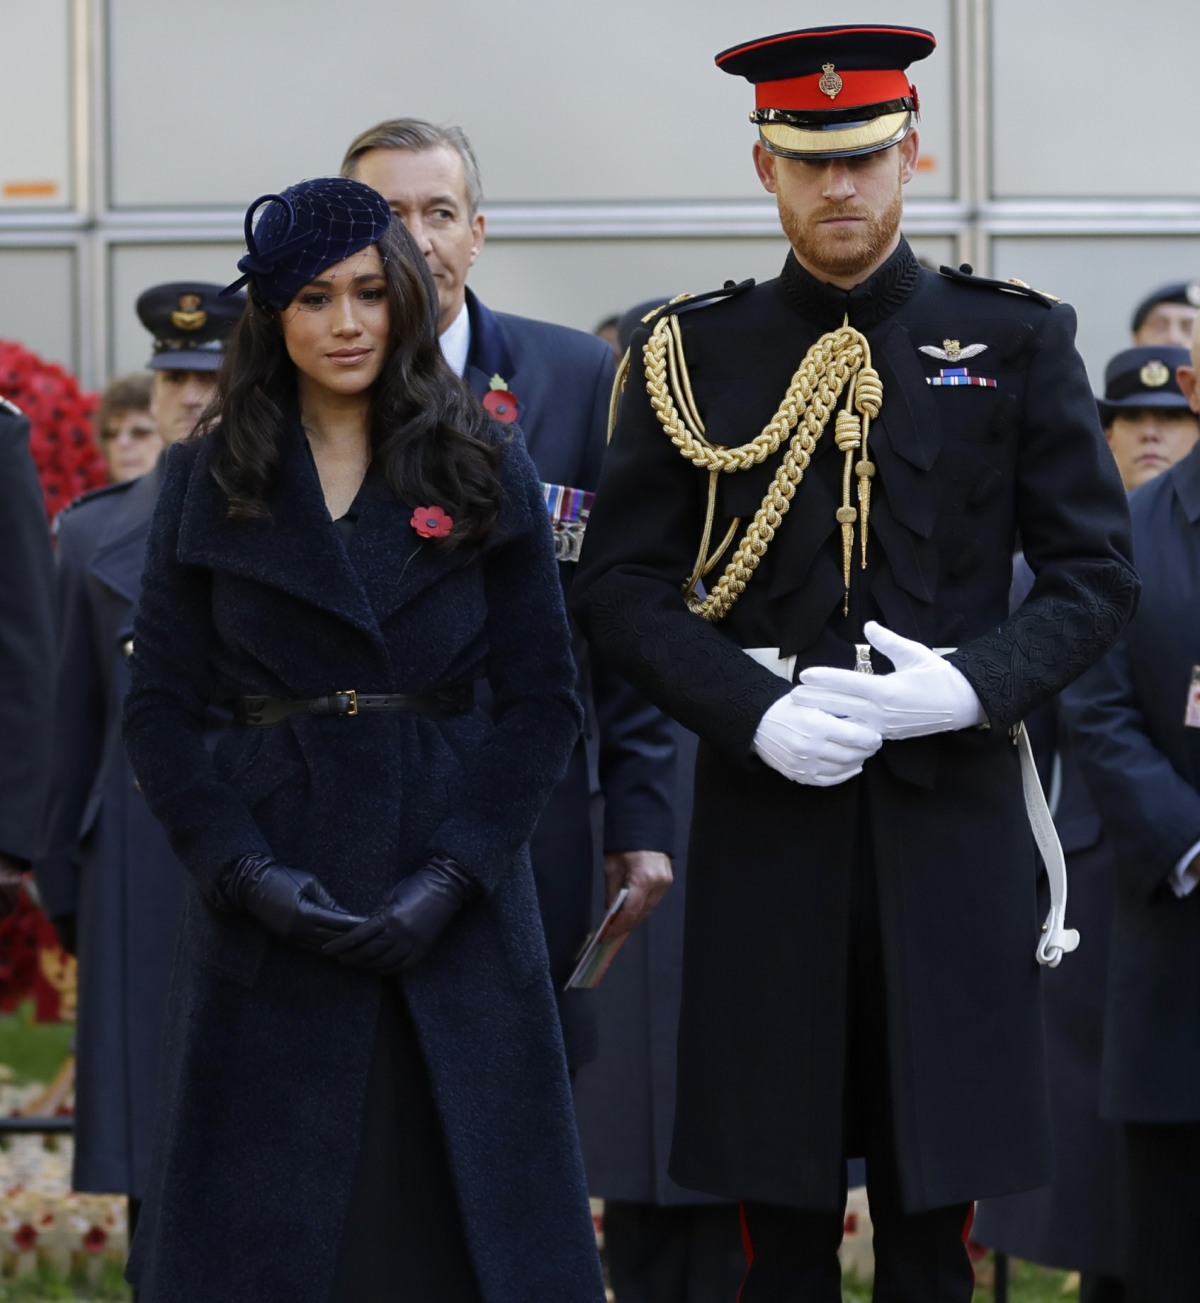 Britain's Prince Harry and Meghan, the Duchess of Sussex attend the 91st Field of Remembrance at Westminster Abbey in London, Thursday, Nov. 7, 2019.